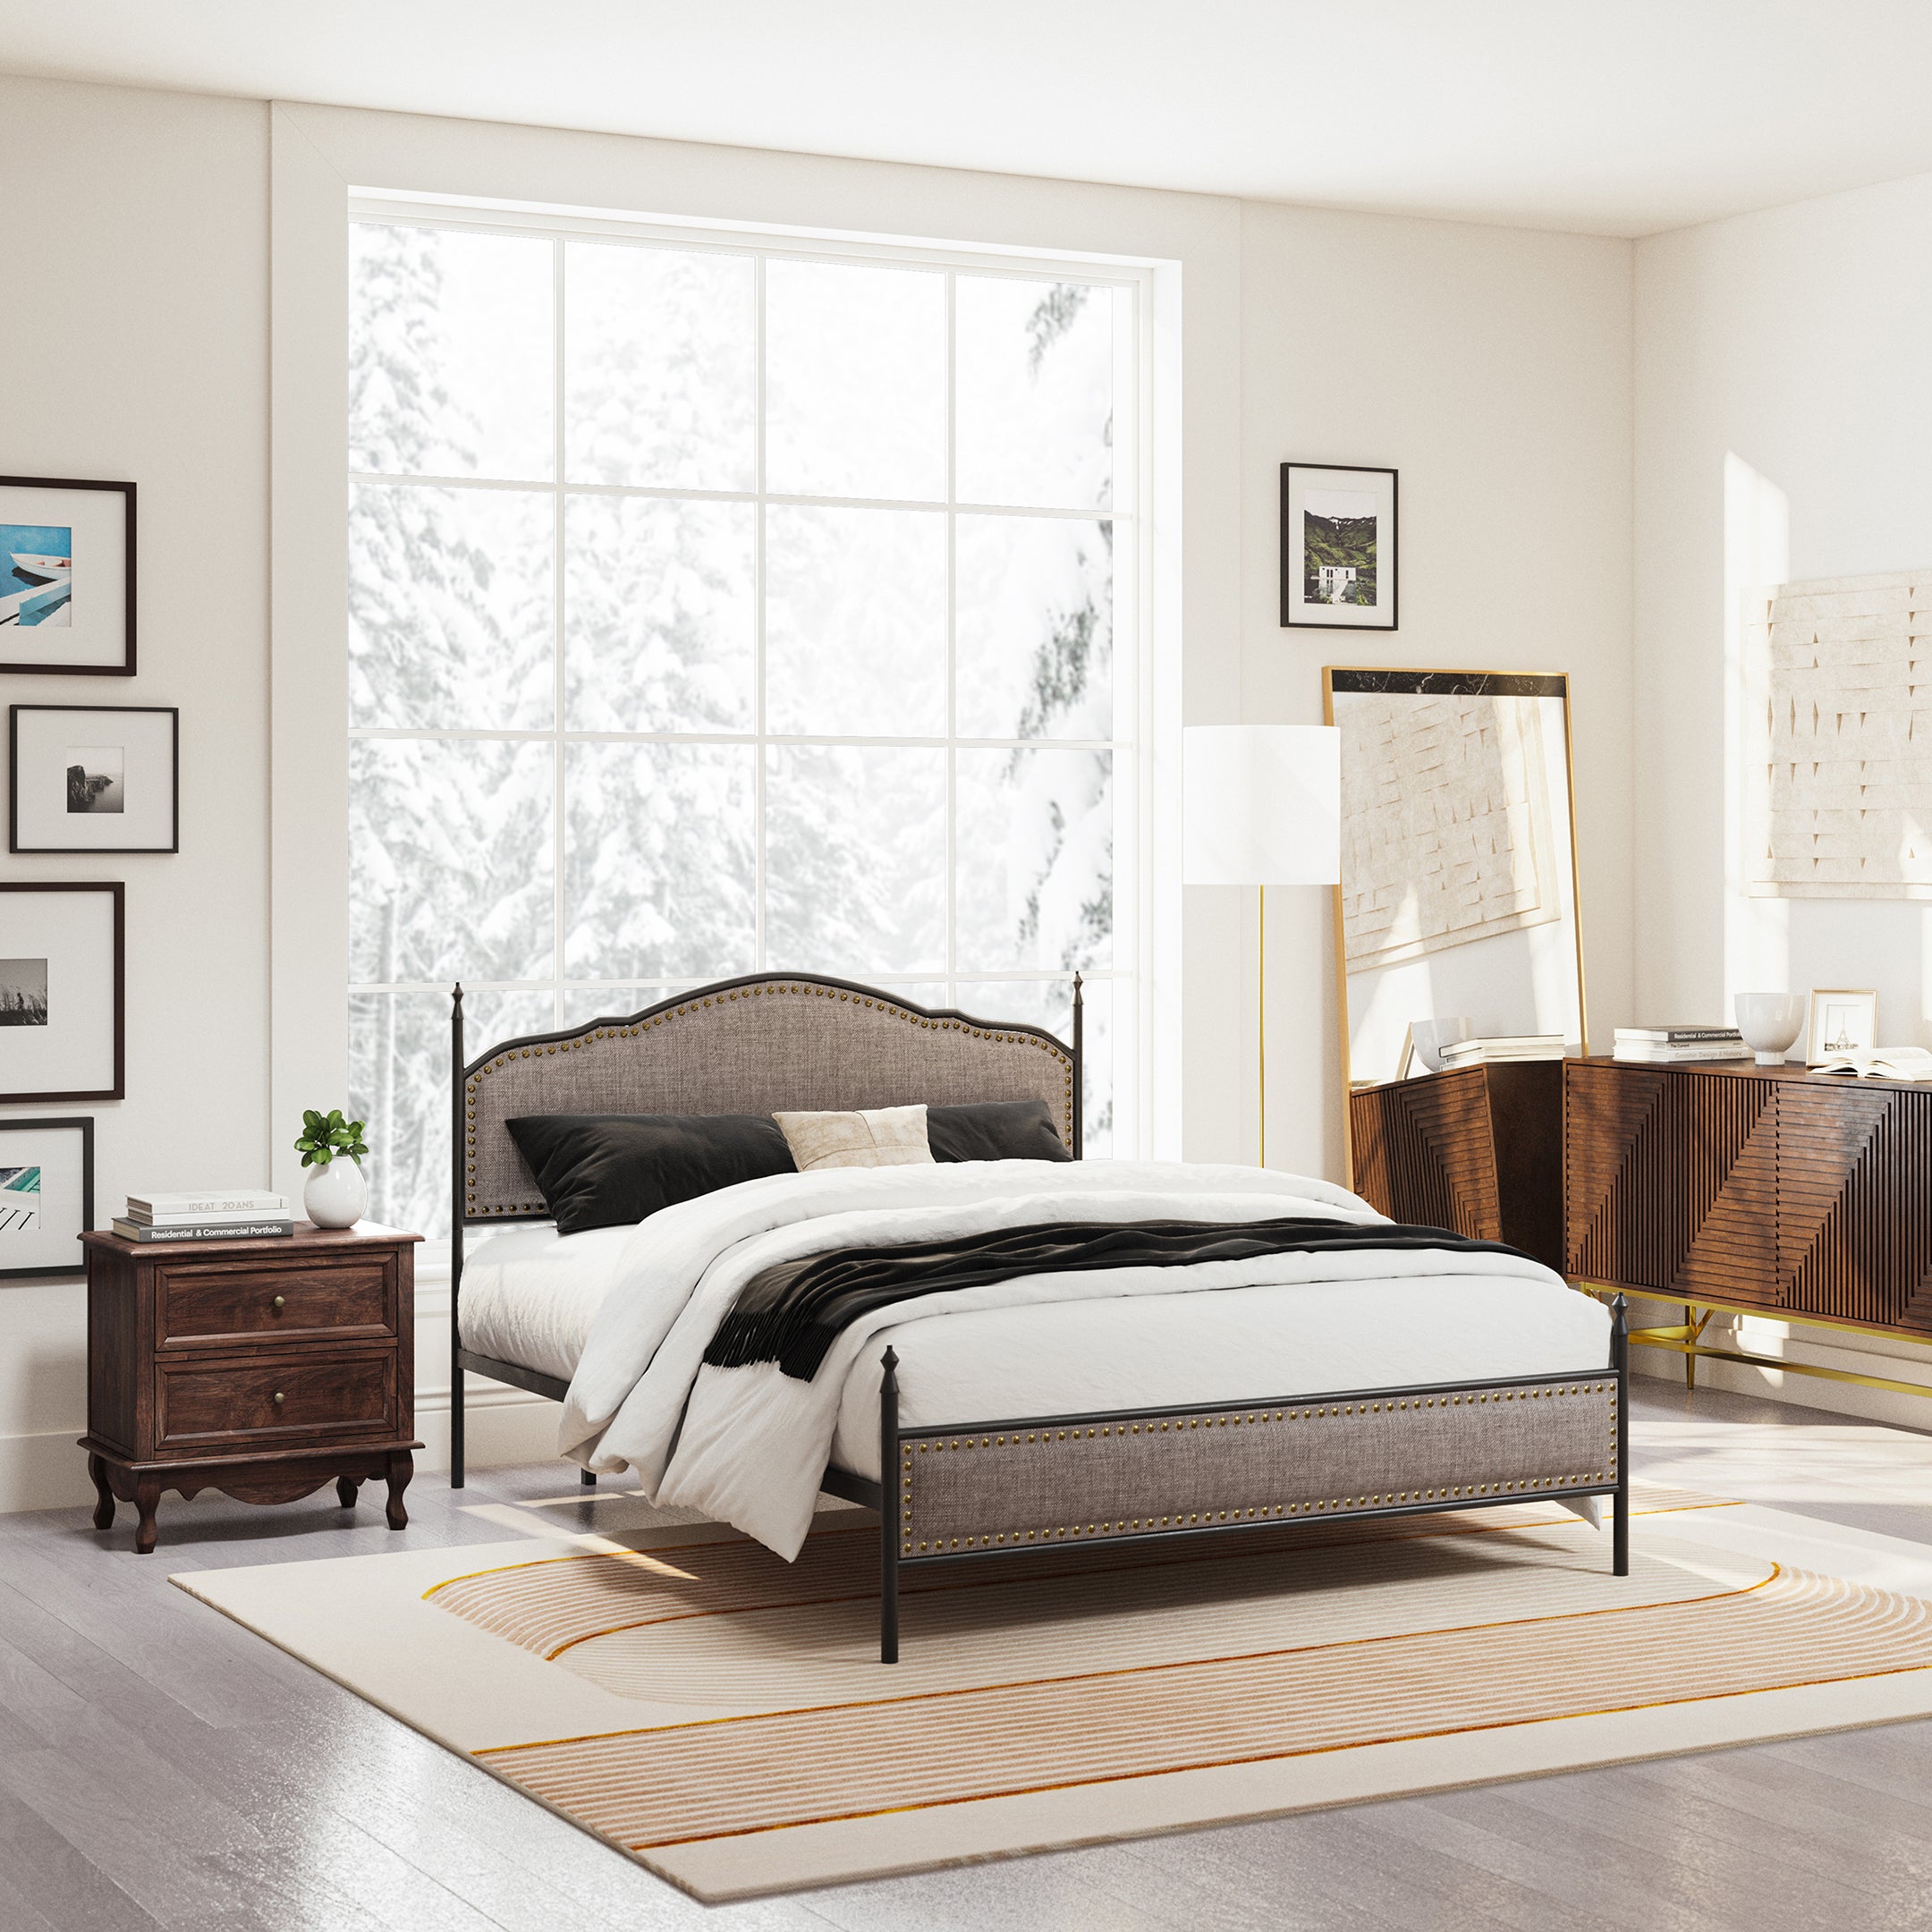 SBHM0739-WAL_Z2XXBED0015-K-BROWN_NSCL0522-WALNUT_Bedroom_1_1_7be456bd-c025-40f2-adc7-fa156d13bf18